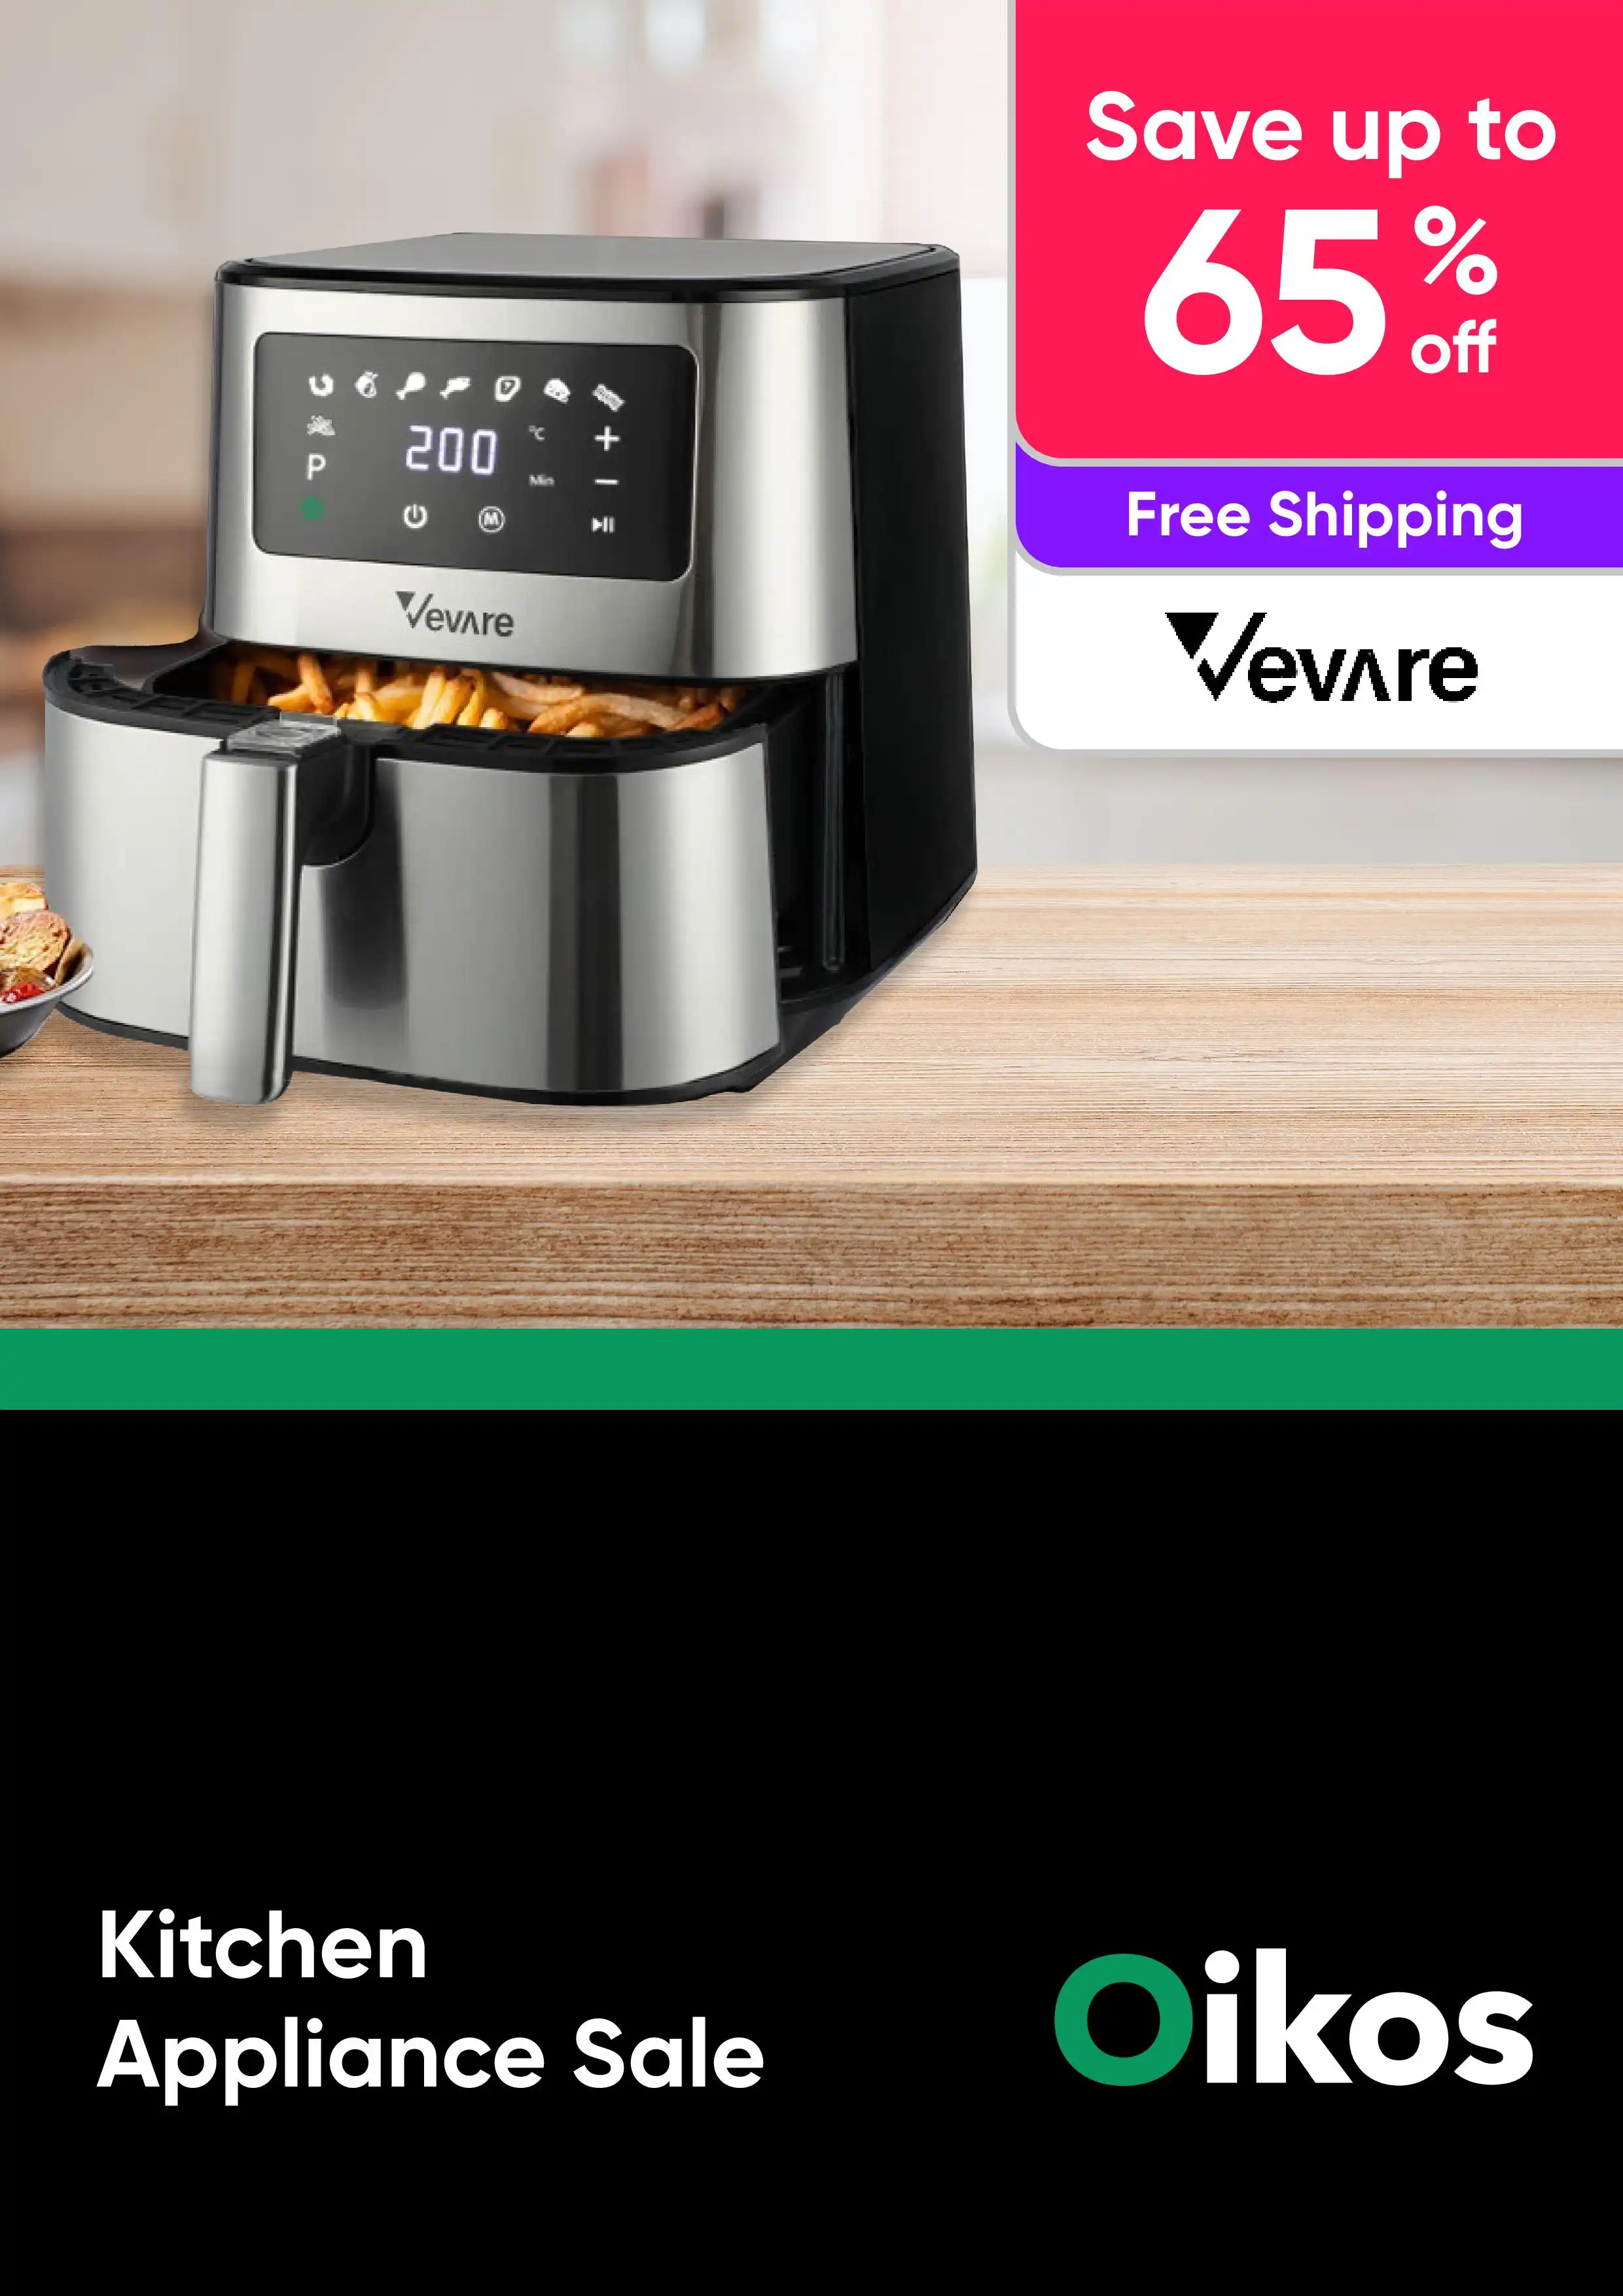 Kitchen Appliance Sale - Air Fryers, Dehydrators and More - Vevare - Up to 65% Off 